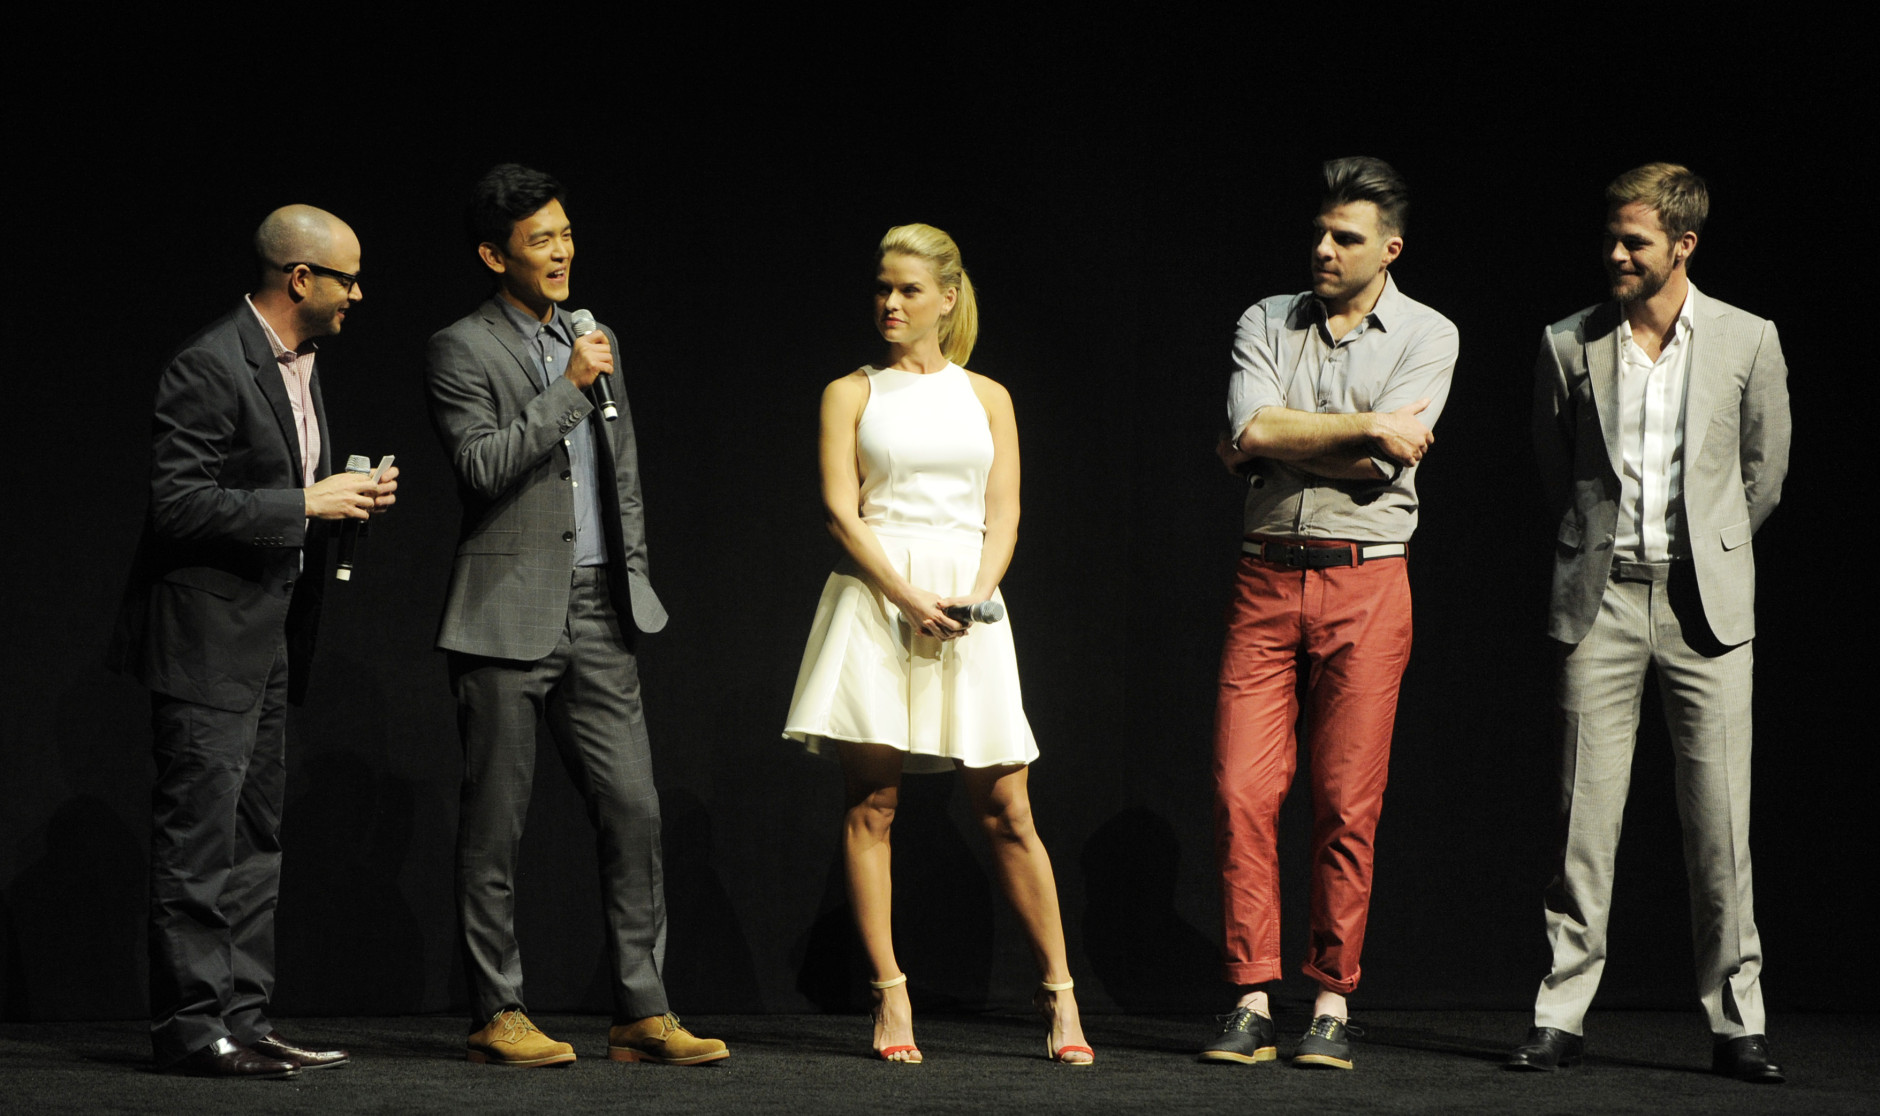 Damon Lindelof, left, co-writer and co-producer of the forthcoming film "Star Trek Into Darkness," joins cast members, left to right, John Cho, Alice Eve, Zachary Quinto and Chris Pine to answer questions about the film at CinemaCon 2013's Opening Night Presentation from Paramount Pictures at Caesars Palace on Tuesday, April 15, 2013 in Las Vegas. (Photo by Chris Pizzello/Invision/AP)